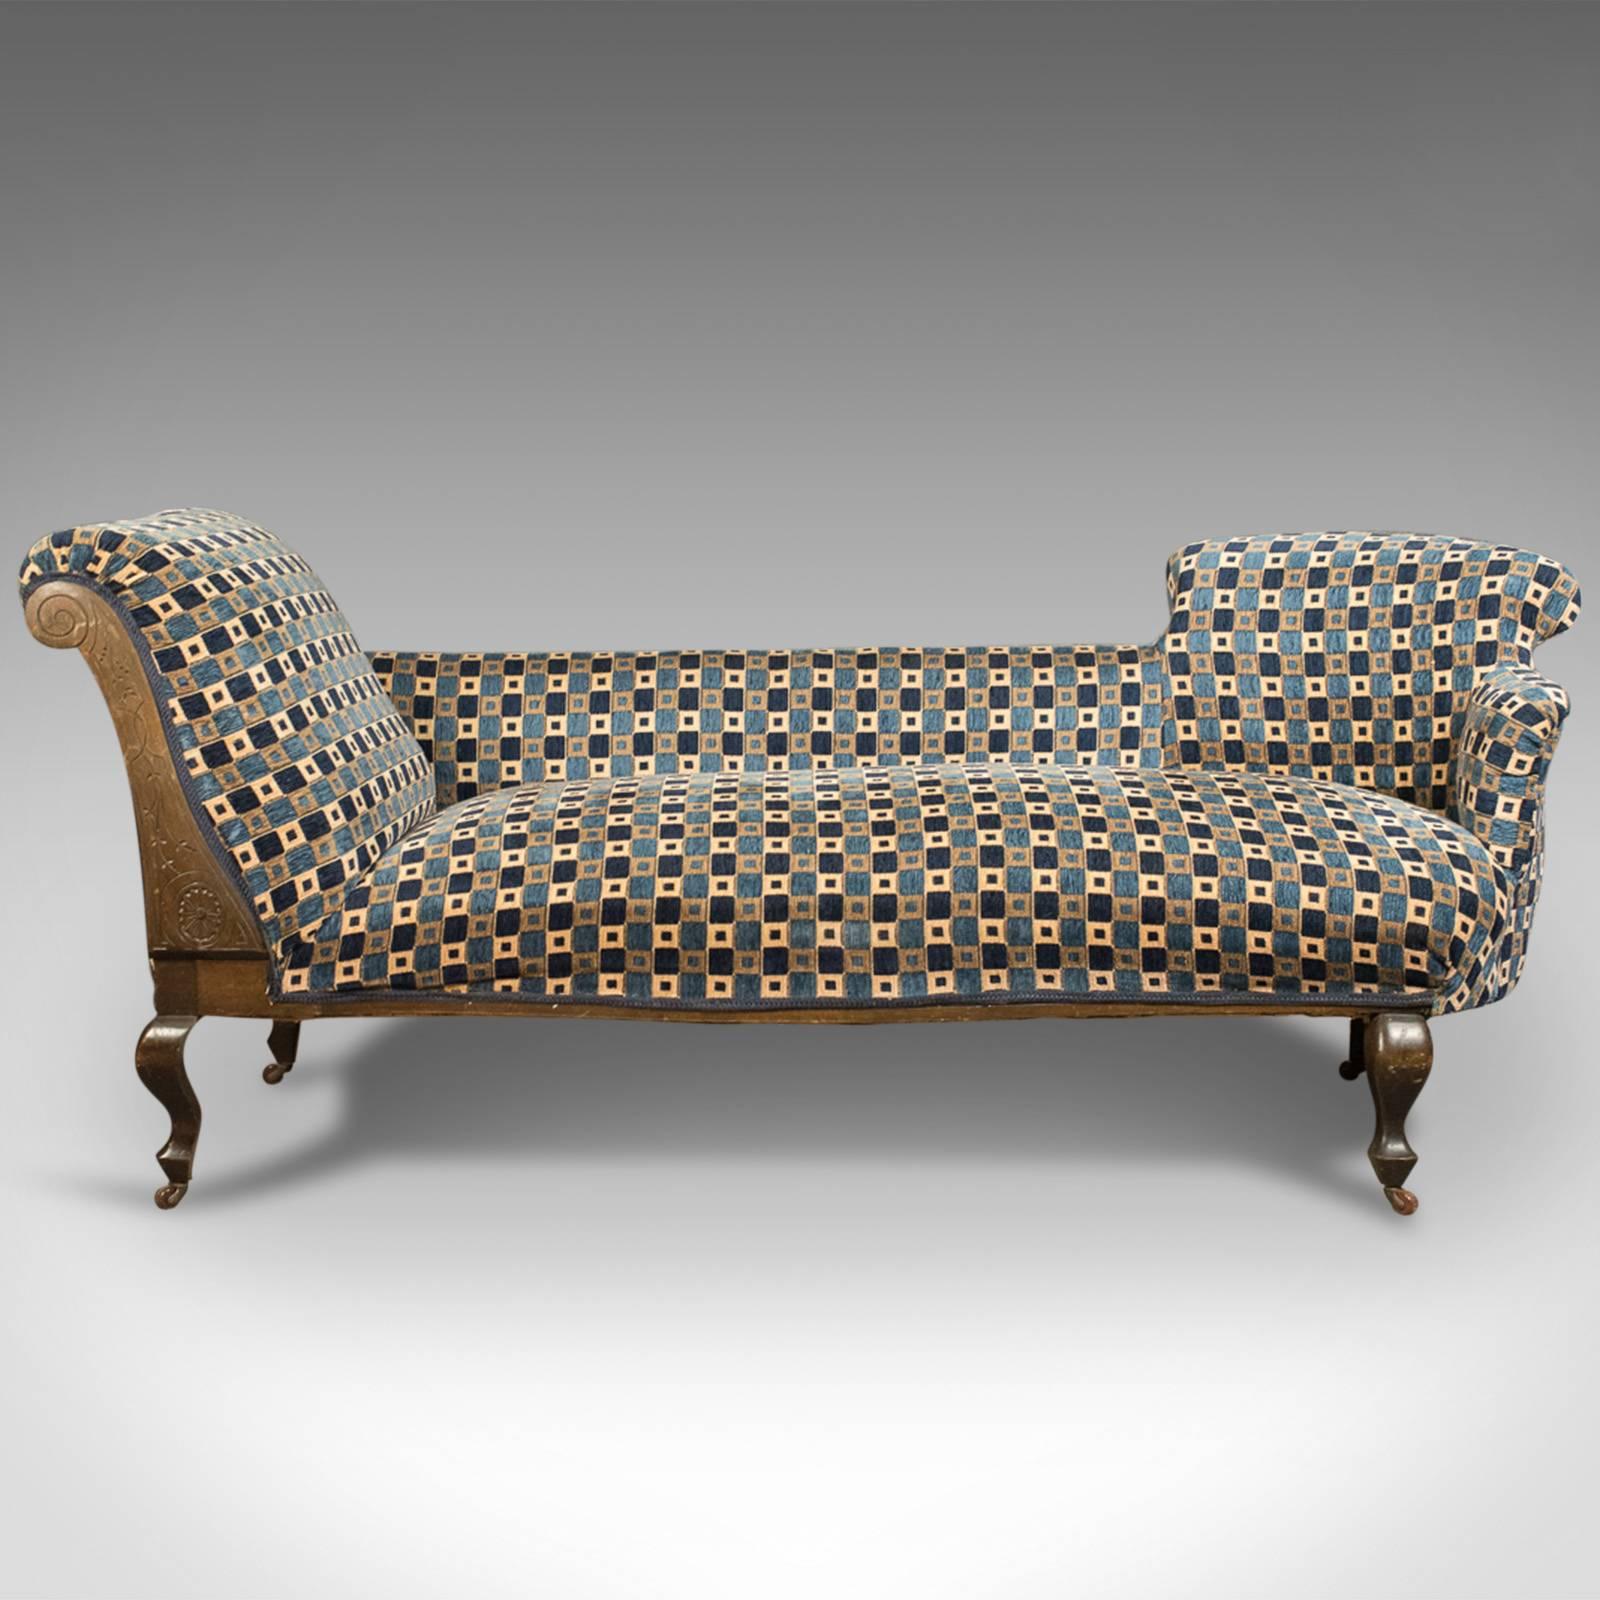 This is a good quality antique chaise longue, an Edwardian daybed, English dating to circa 1910.

Double ended sofa daybed presented in fine order
Raked and scrolled one end with chair back and arm opposing
Well sprung and professionally